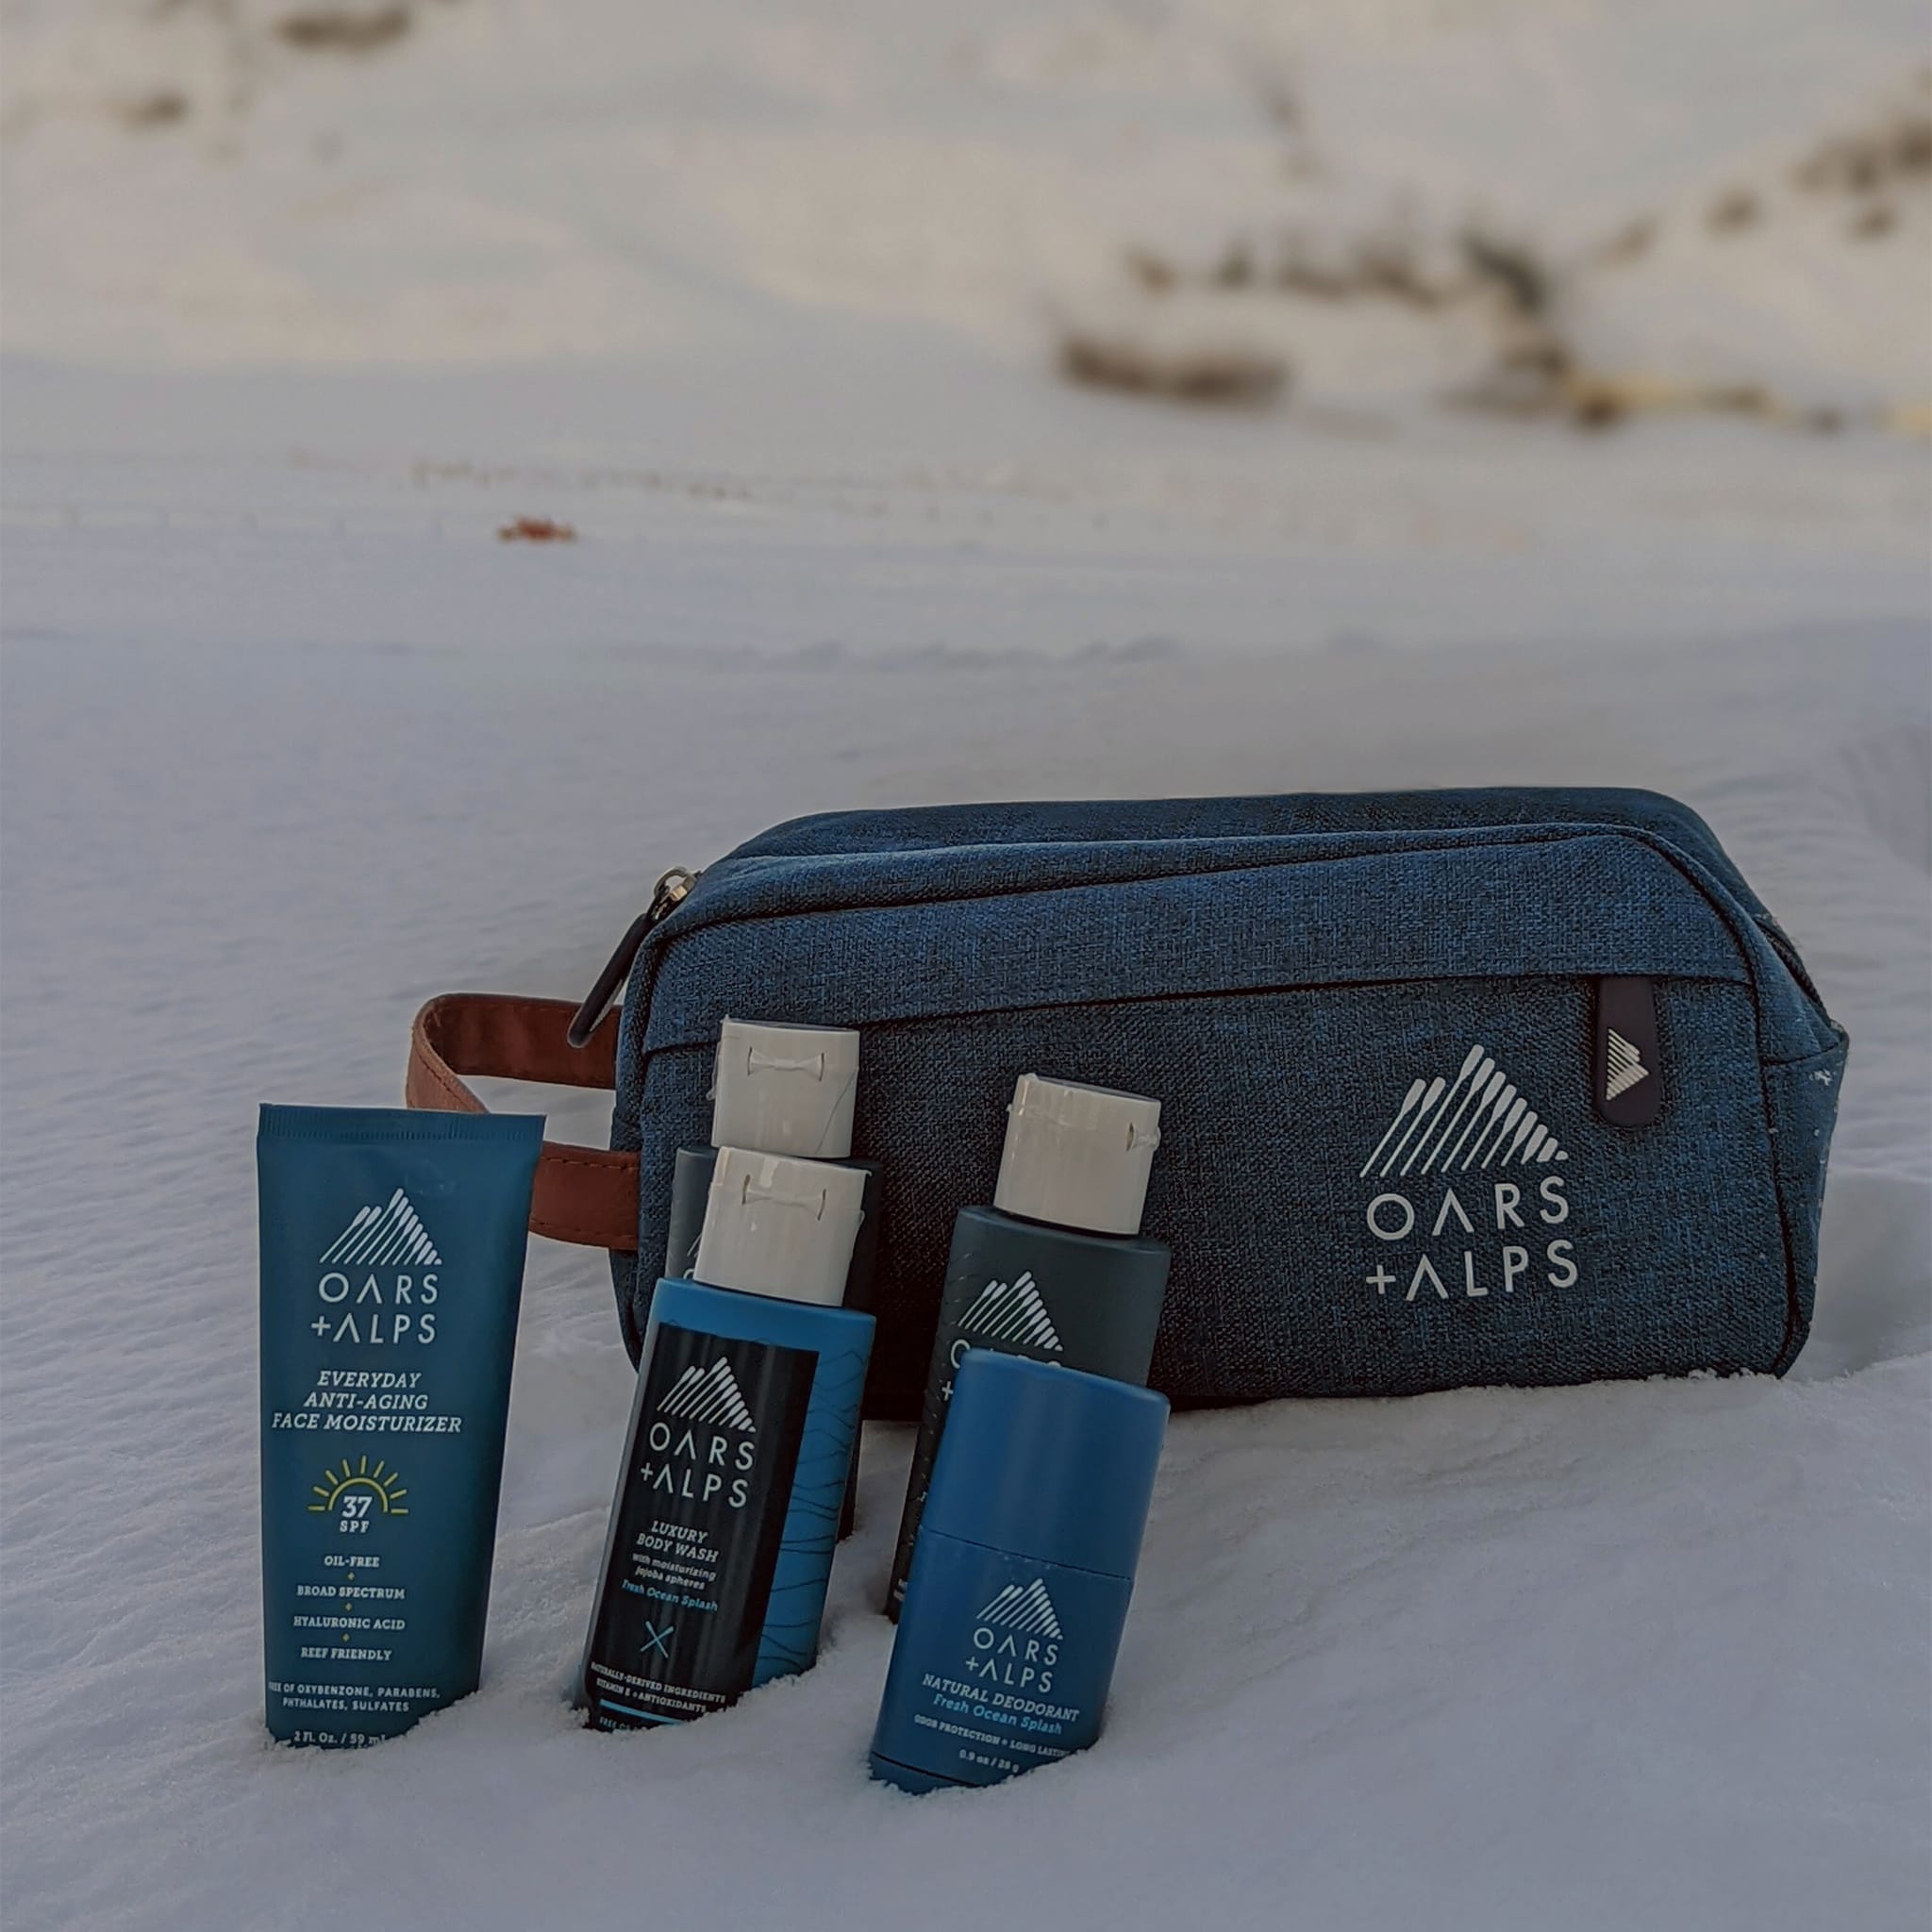 Oars + Alps dopp kit, Everyday Anti-Aging Face Moisturizer with SPF 37, Aluminum-Free Deodorant, and Travel Size Shampoo, Conditioner, and Body Wash in the snow in front of a mountain